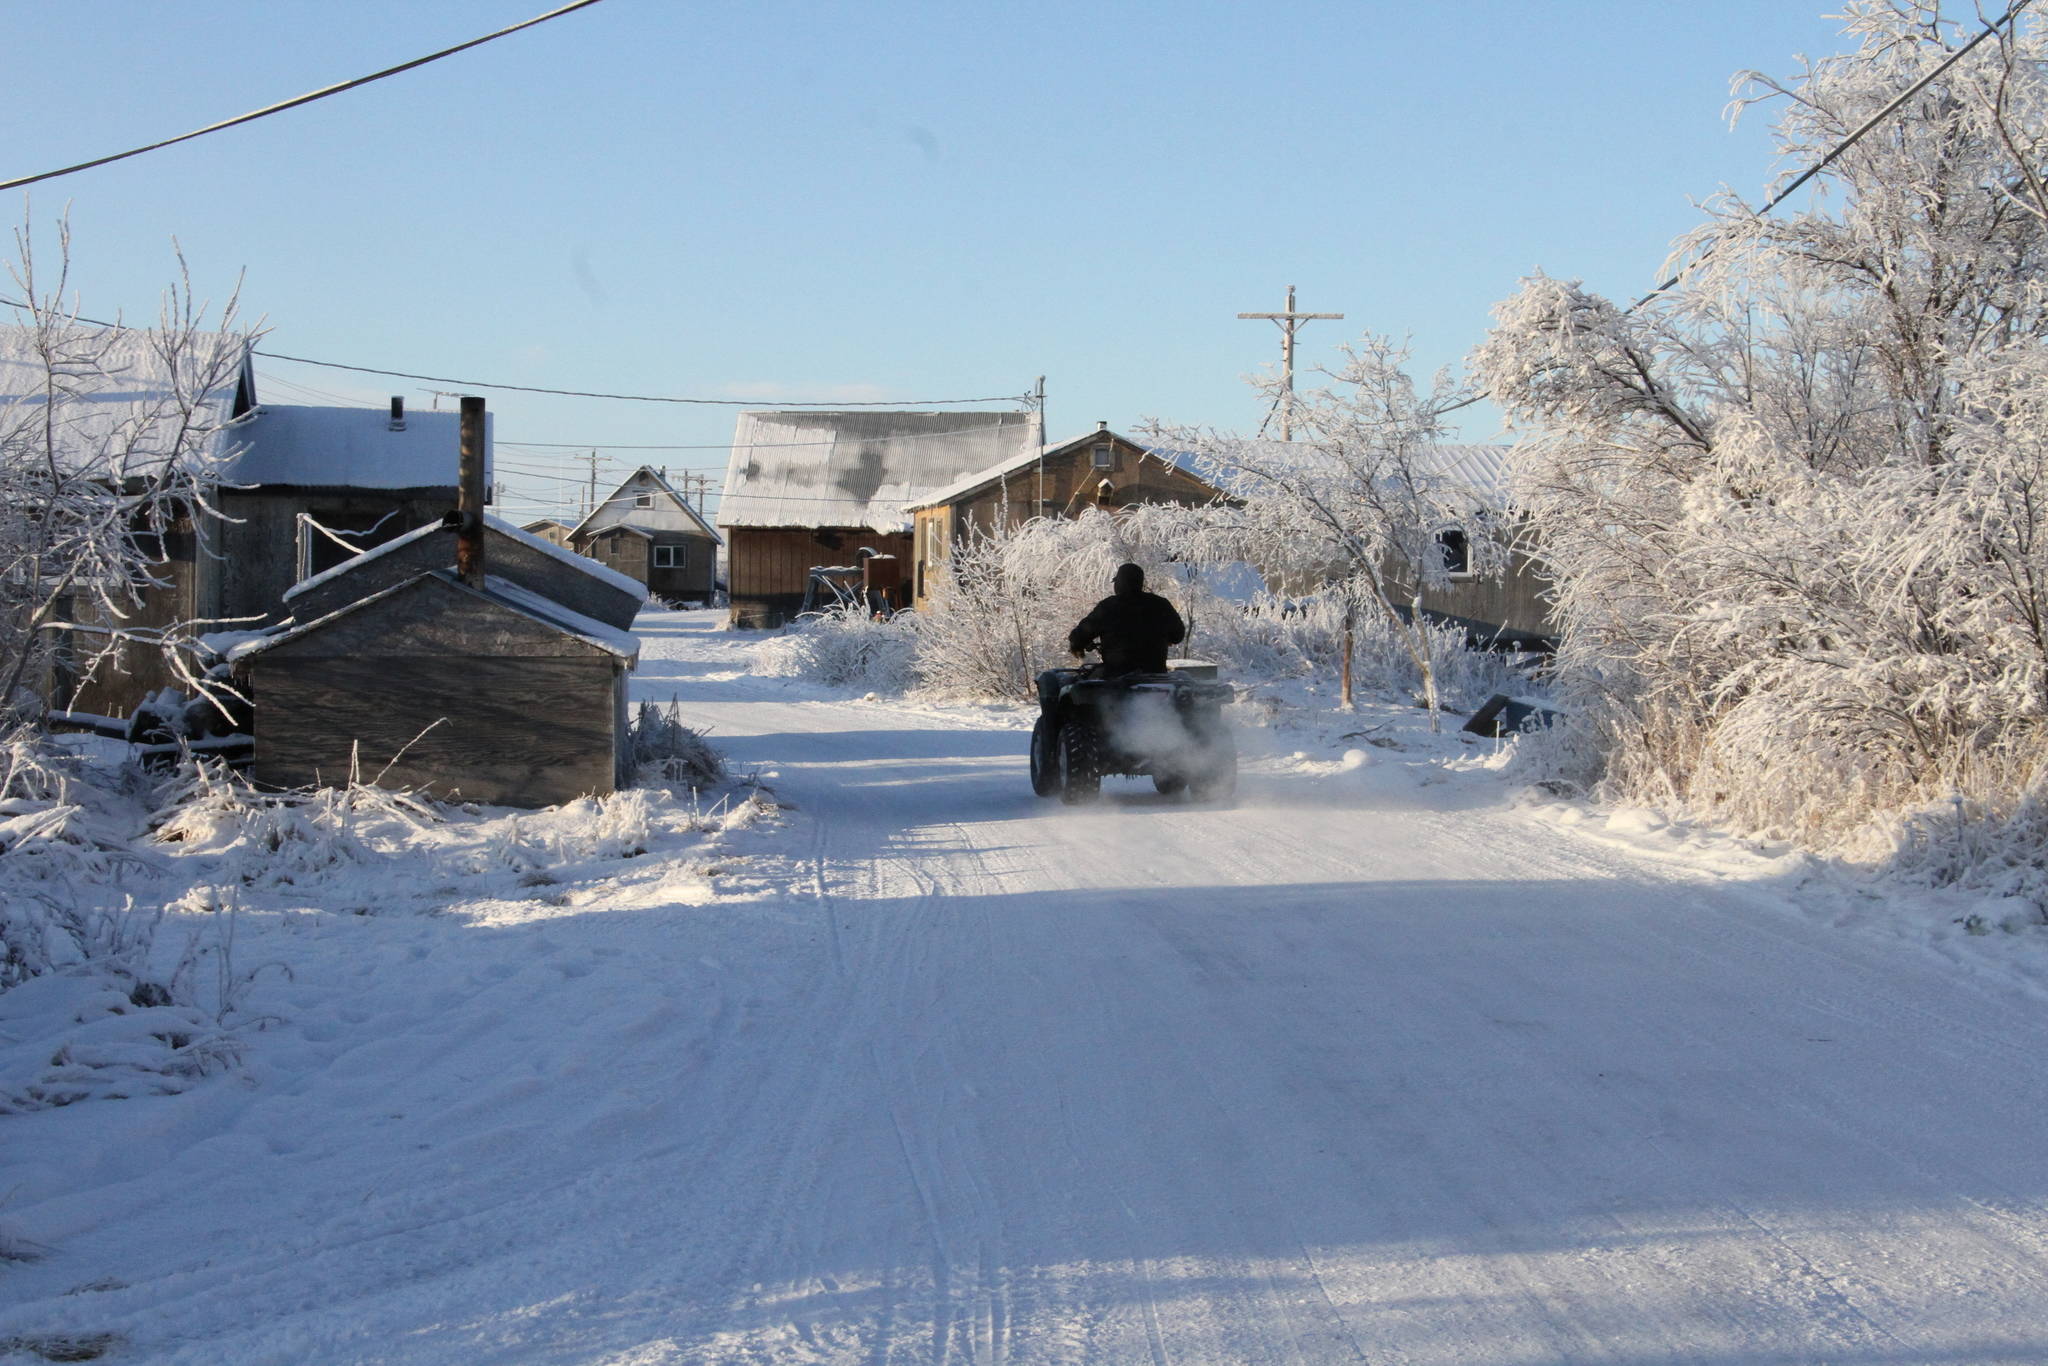 This Dec. 3, 2019, photo shows a man driving a four-wheeler down a street in Napakiak, Alaska. The Alaska National Guard brought its Operation Santa Claus to the western Alaska community, which is being severely eroded by the nearby Kuskokwim River. (AP Photo/Mark Thiessen)